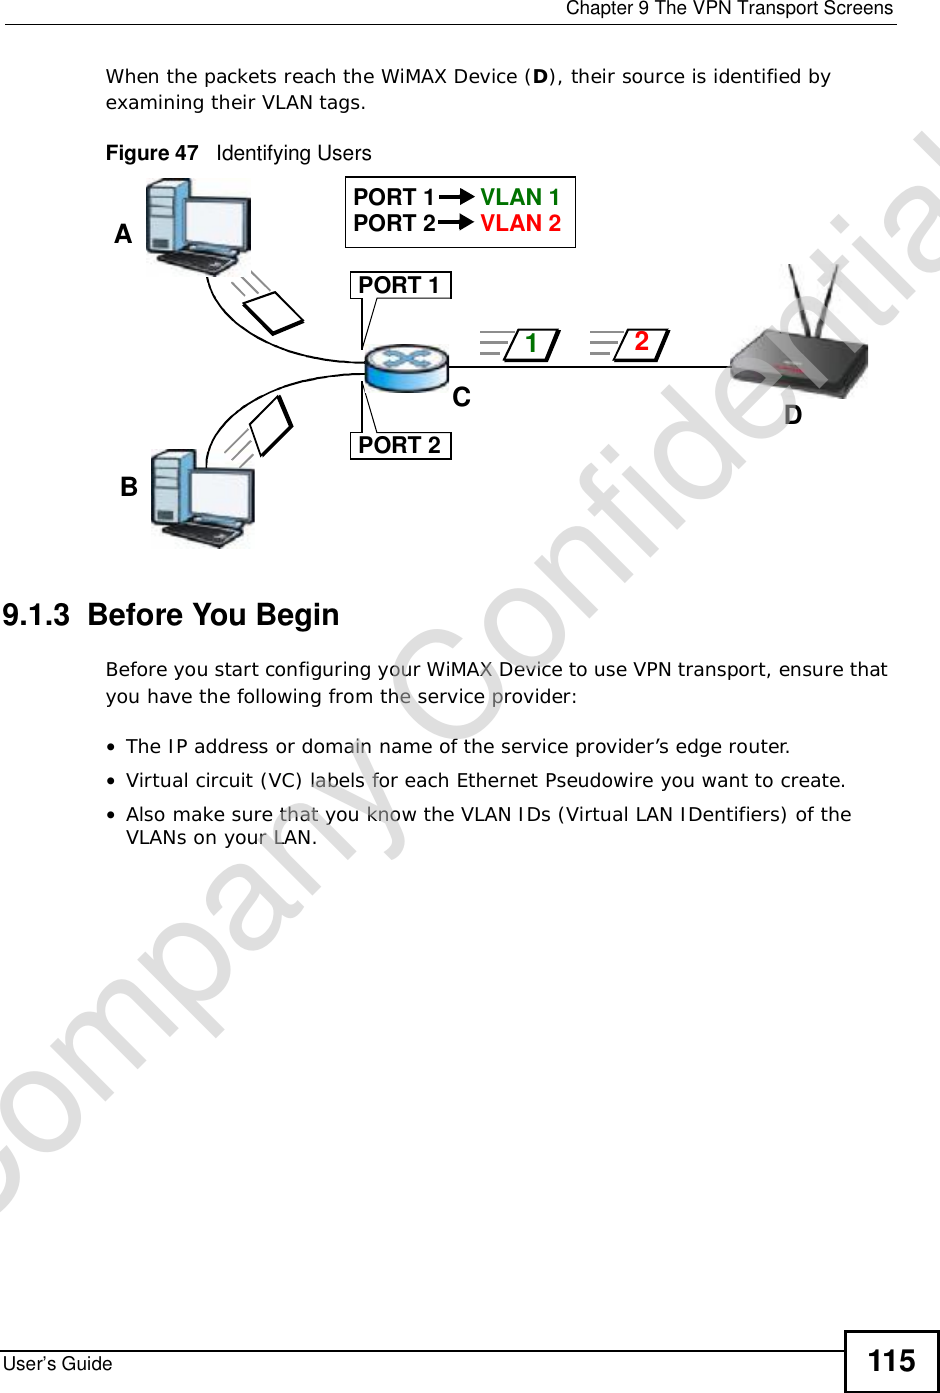  Chapter 9The VPN Transport ScreensUser’s Guide 115When the packets reach the WiMAX Device (D), their source is identified by examining their VLAN tags.Figure 47   Identifying Users9.1.3  Before You BeginBefore you start configuring your WiMAX Device to use VPN transport, ensure that you have the following from the service provider:•The IP address or domain name of the service provider’s edge router.•Virtual circuit (VC) labels for each Ethernet Pseudowire you want to create.•Also make sure that you know the VLAN IDs (Virtual LAN IDentifiers) of the VLANs on your LAN.ABPORT 1PORT 2PORT 1       VLAN 1PORT 2       VLAN 212CDCompany Confidential